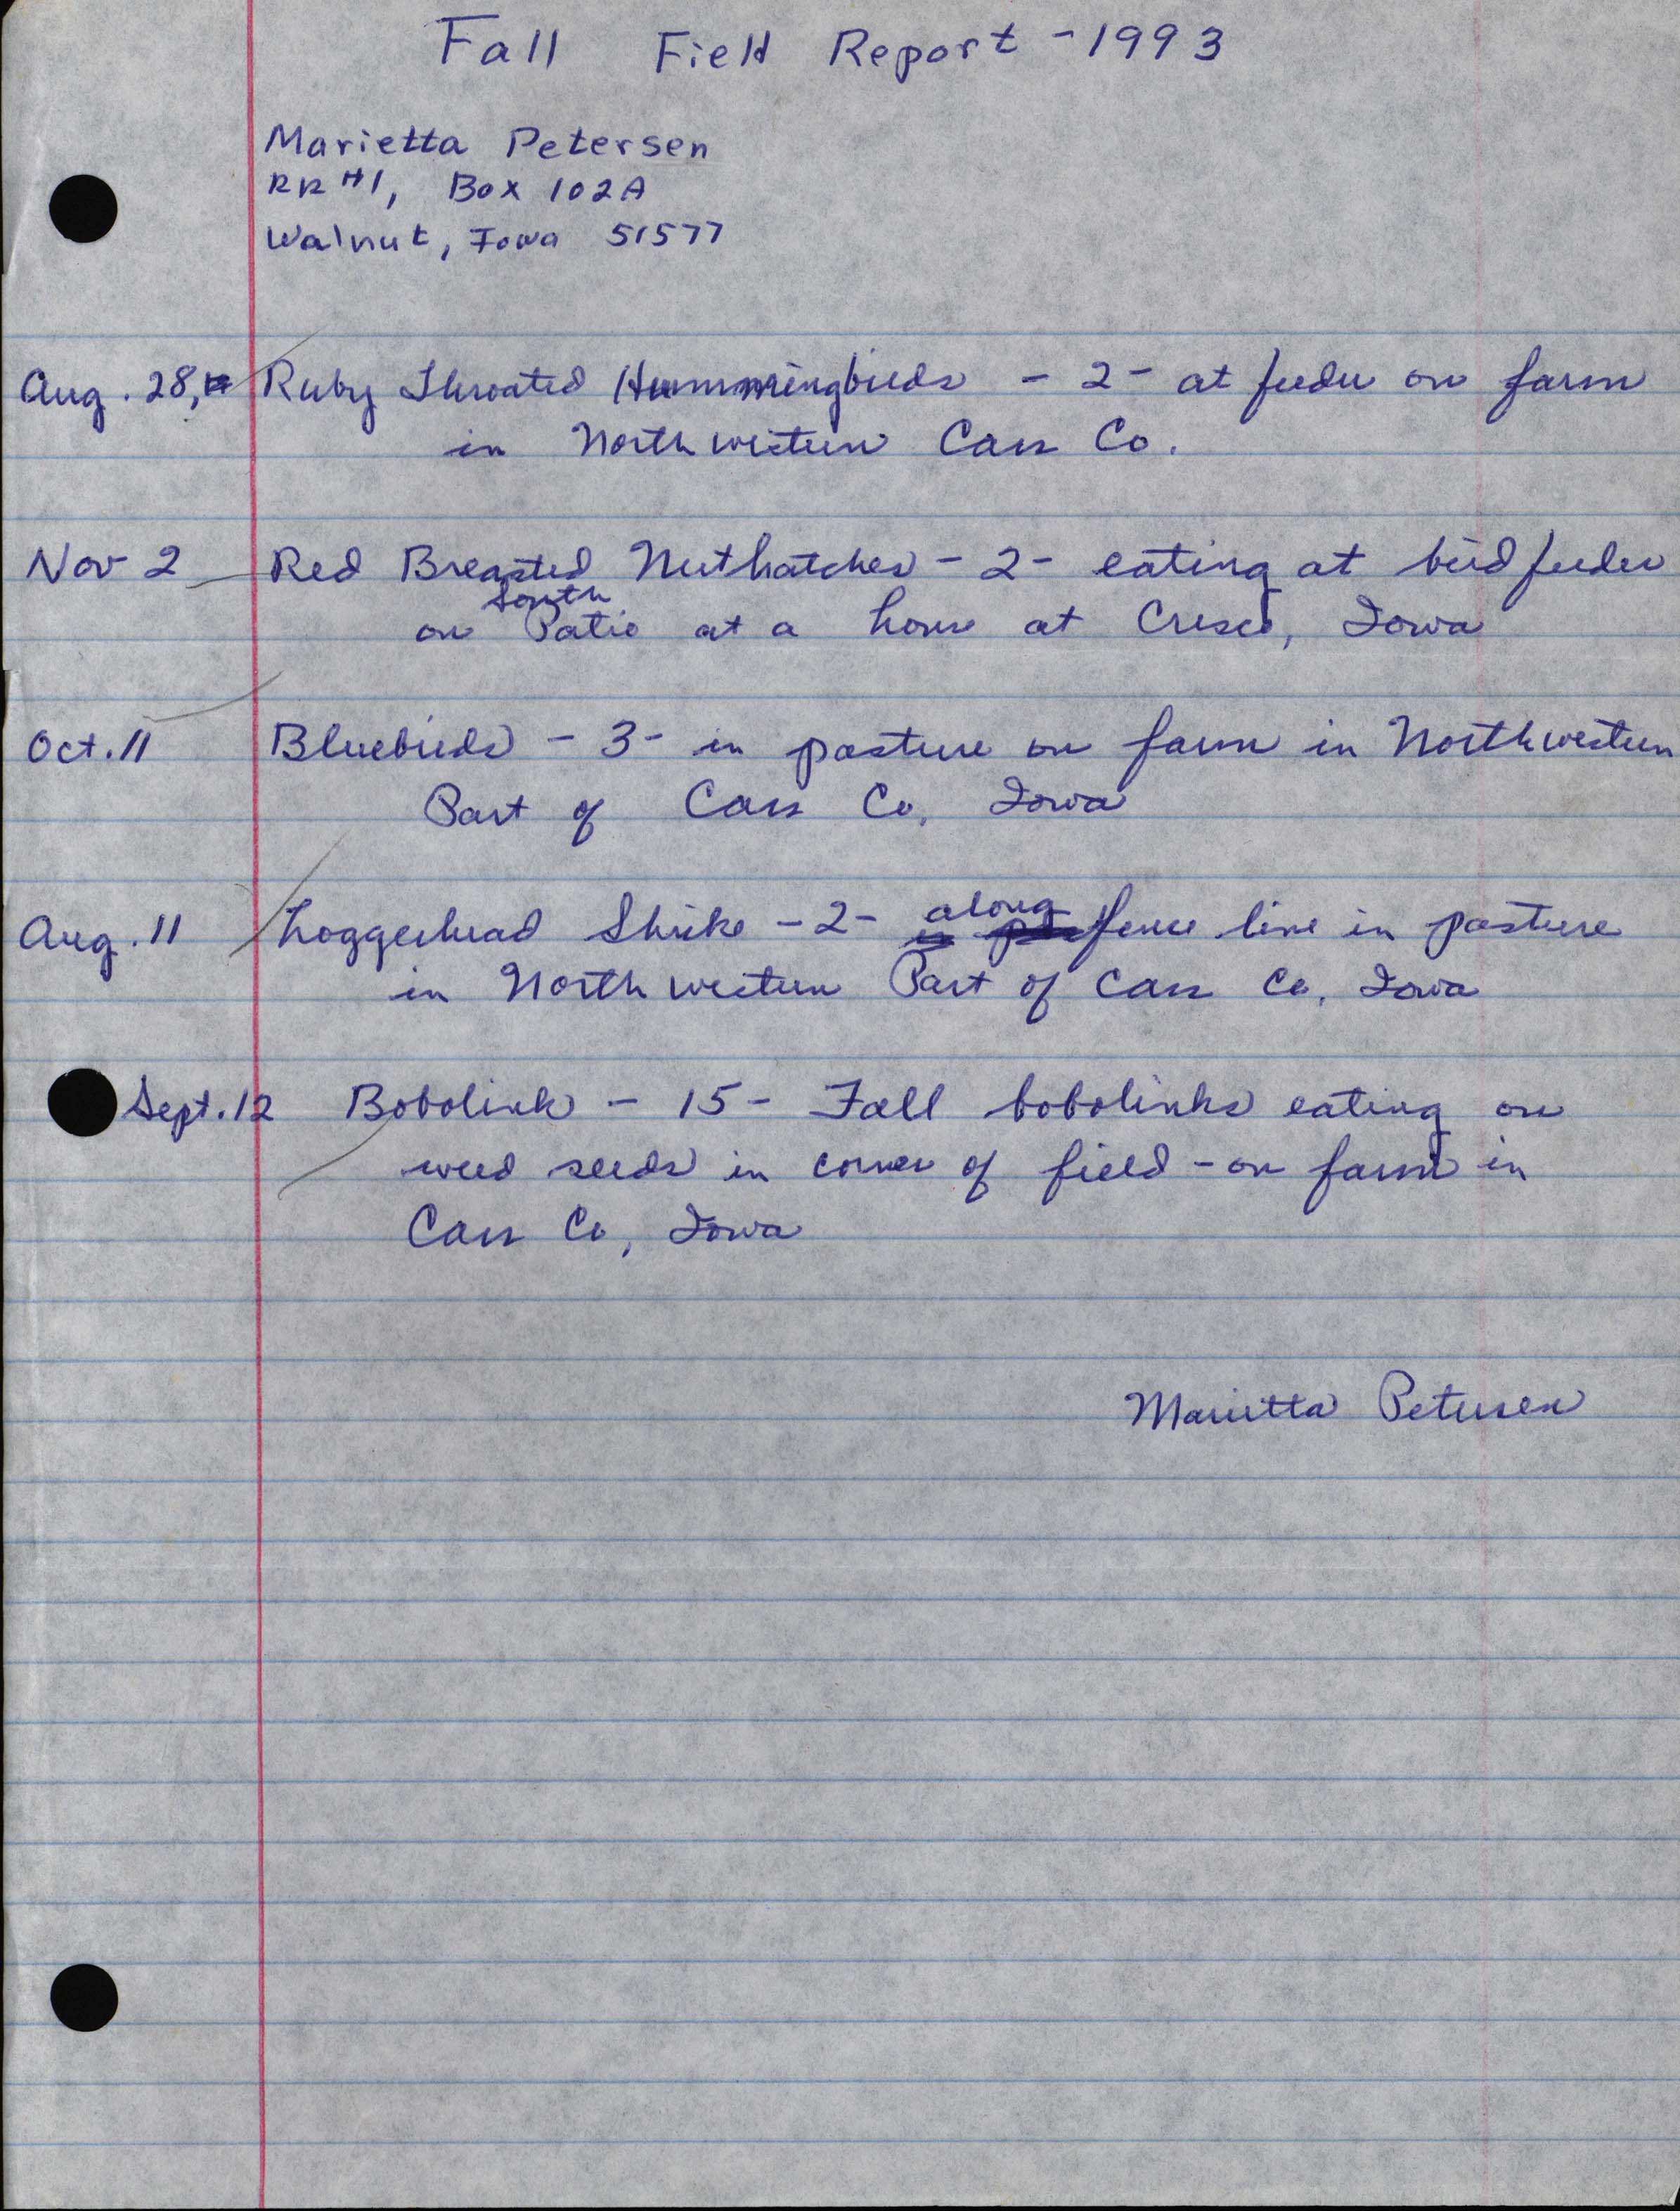 Field notes contributed by Marietta A. Petersen, fall 1993